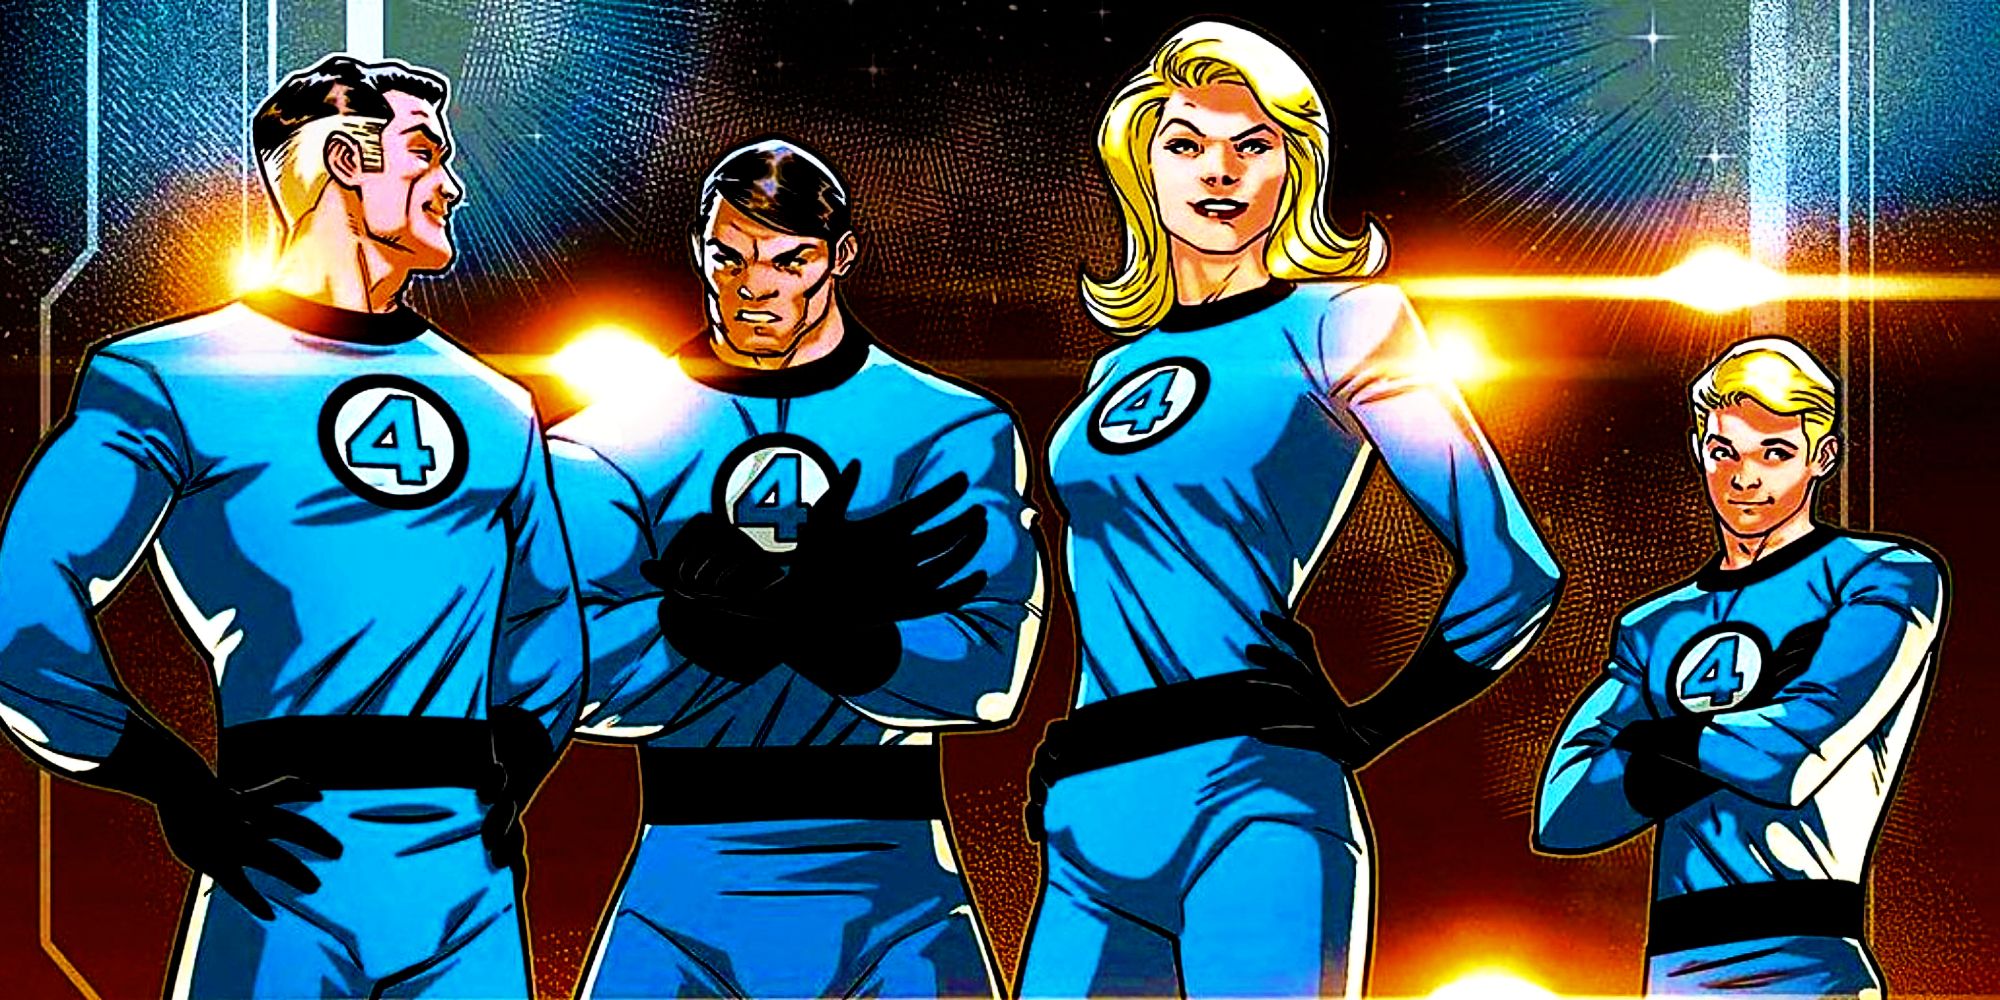 The Fantastic Four Wearing Their Classic 1960s Costumes in Marvel Comics